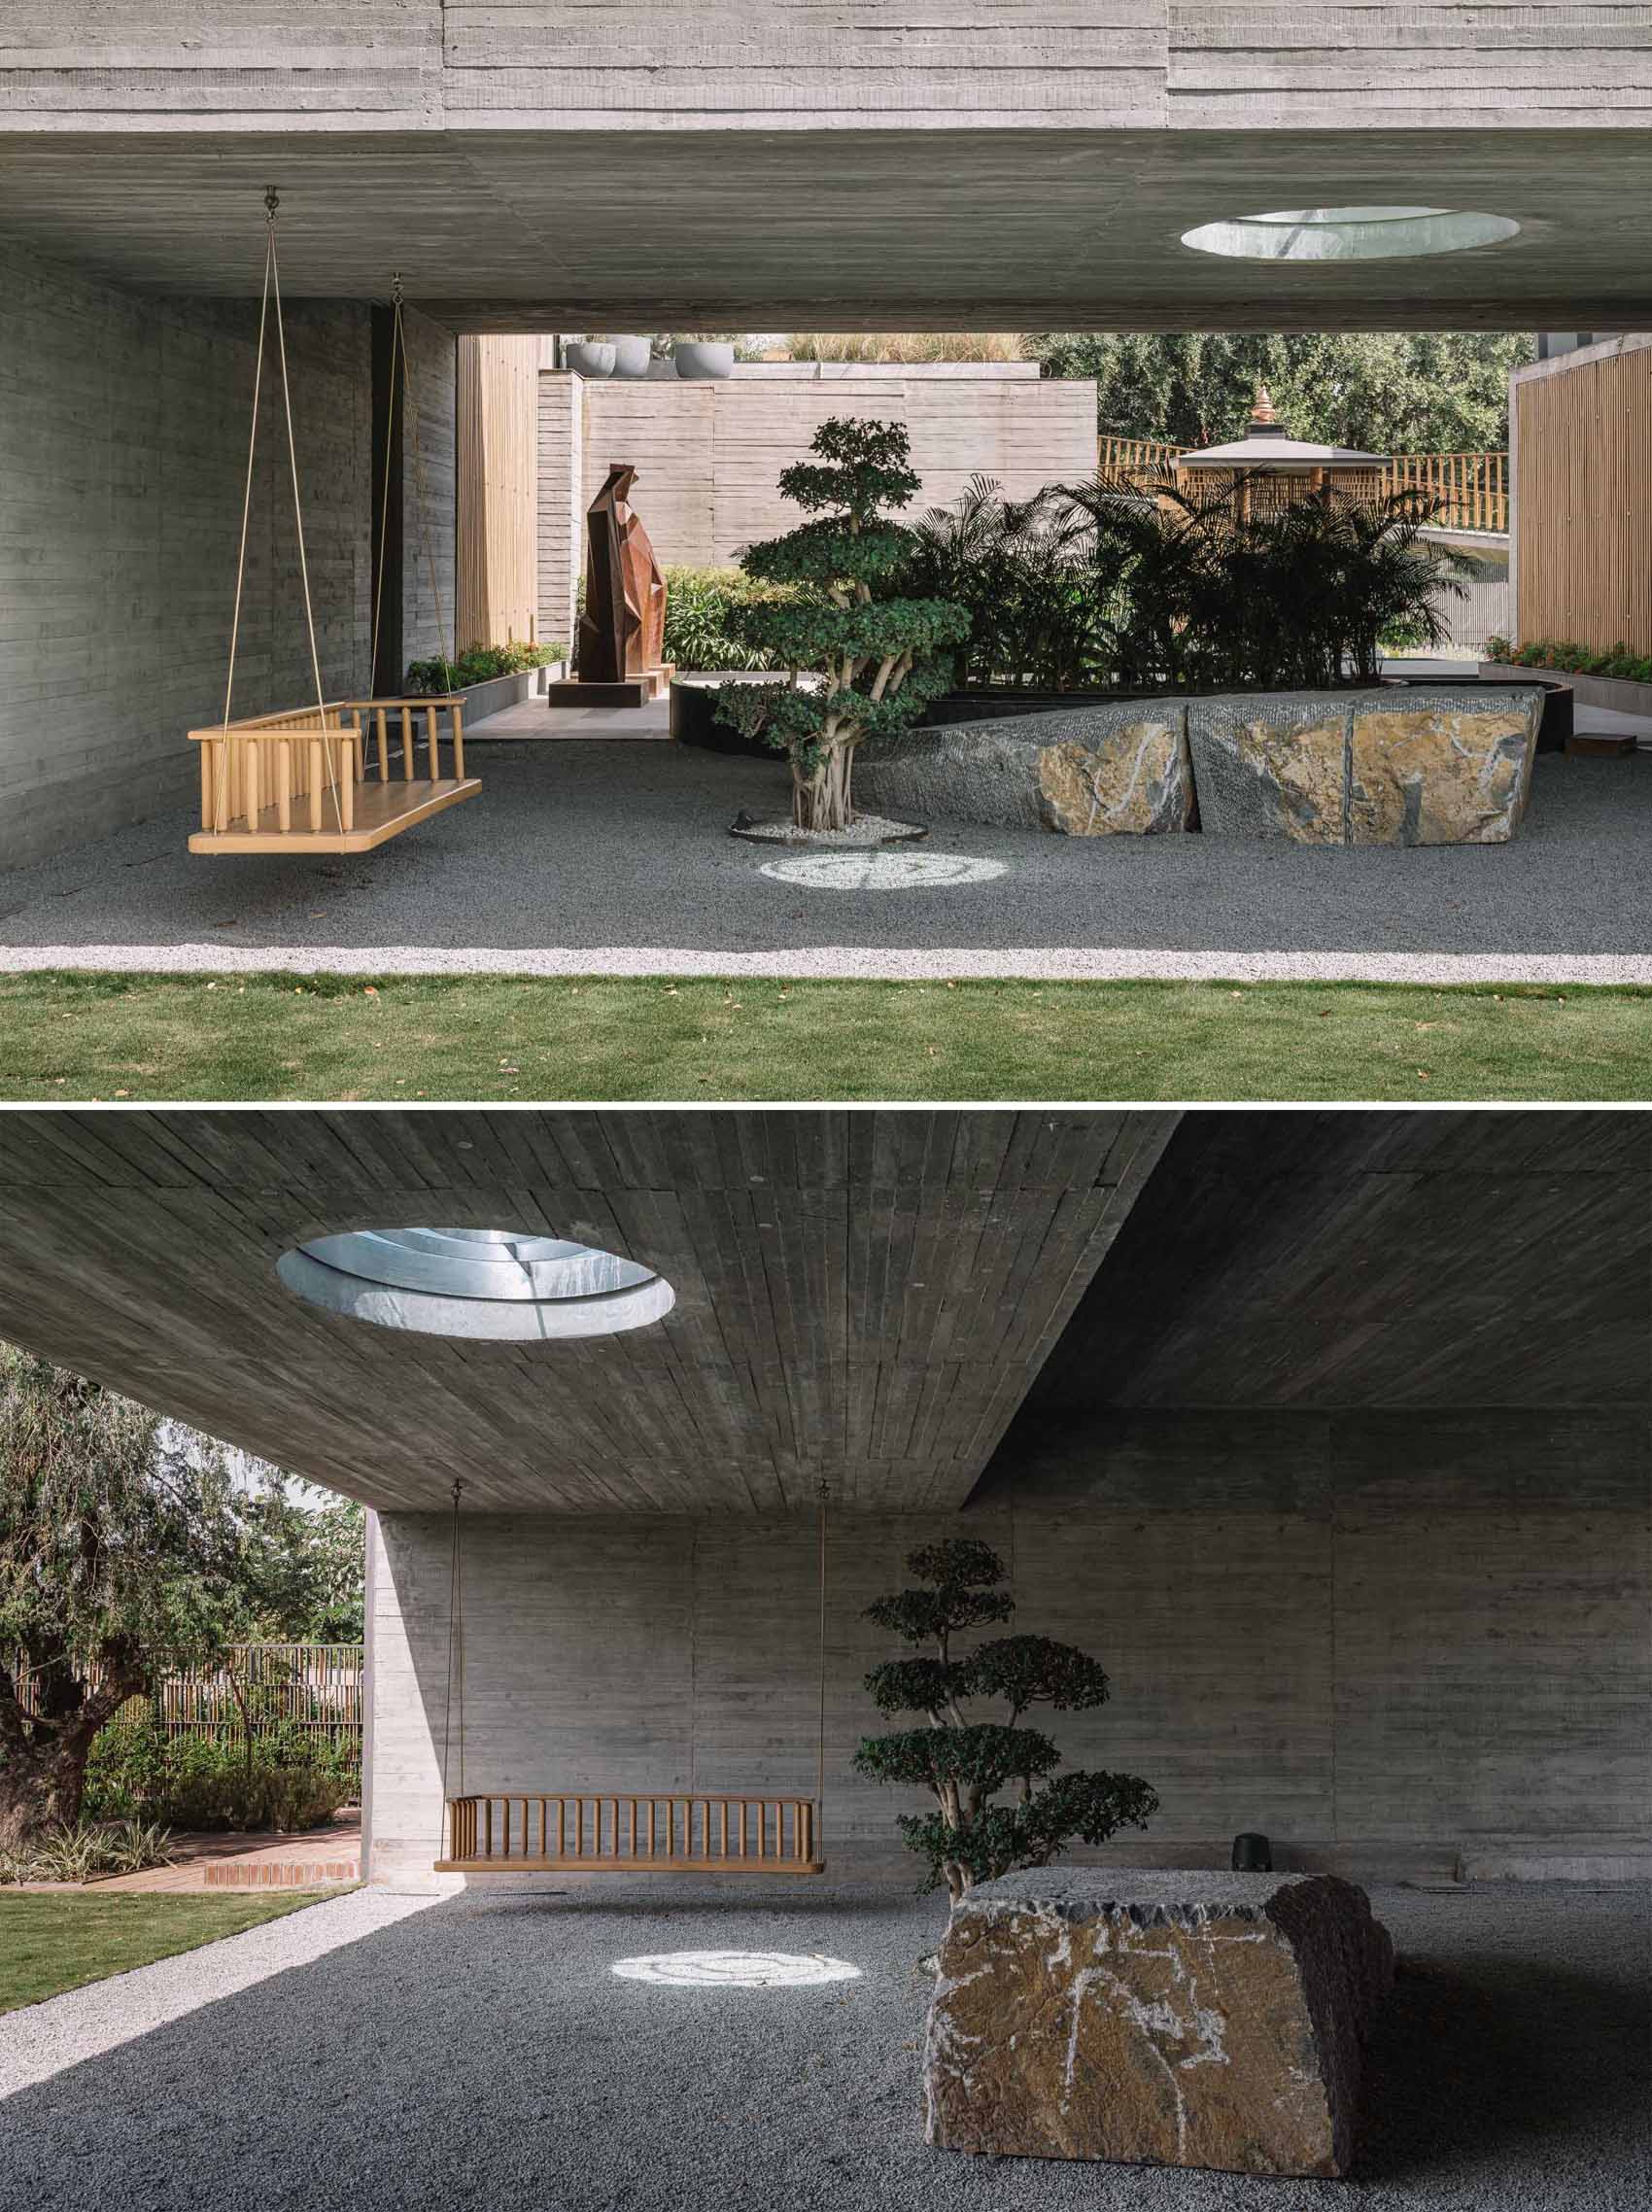 A covered outdoor space with a garden and hanging swing chair.